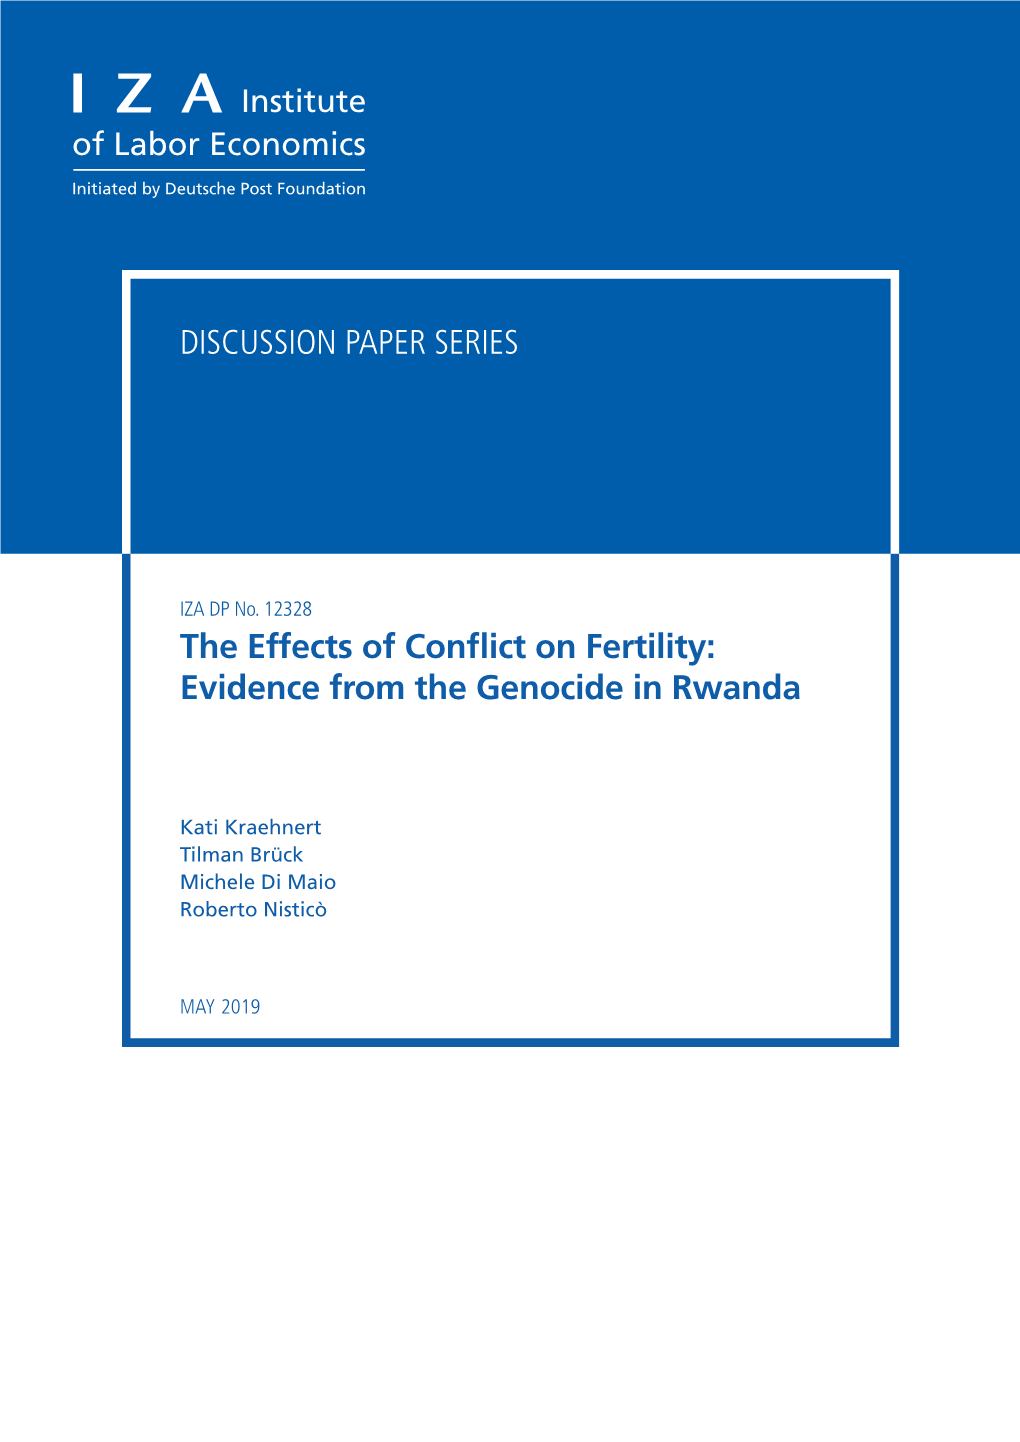 The Effects of Conflict on Fertility: Evidence from the Genocide in Rwanda